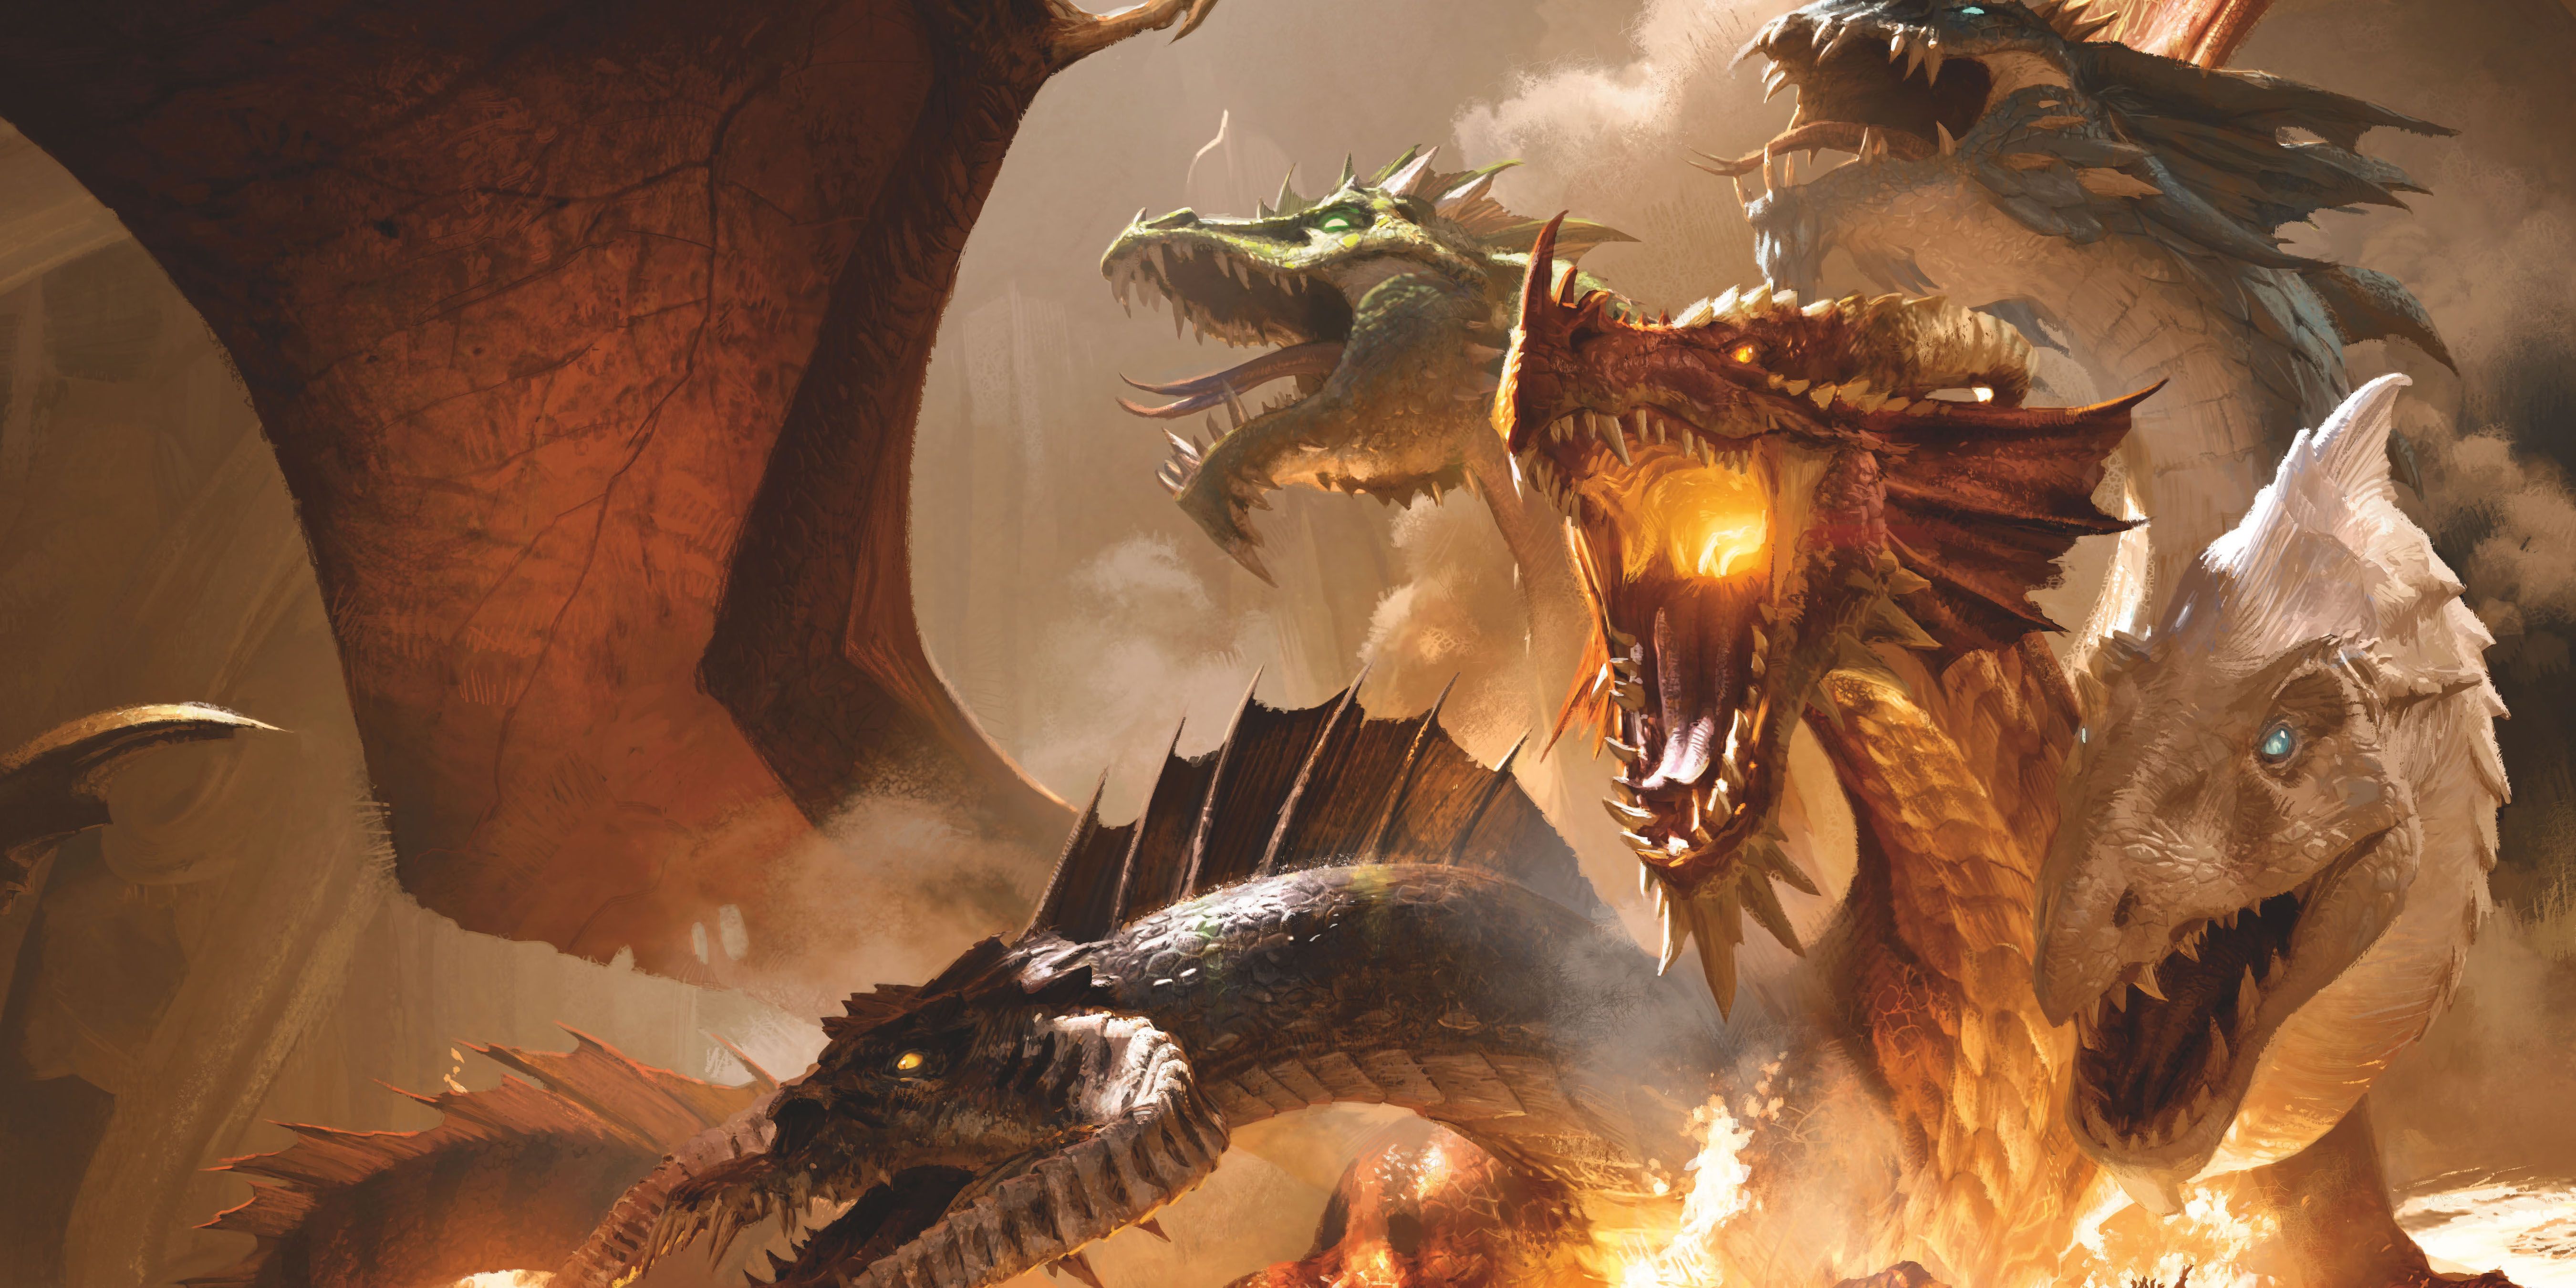 Heads of a Tiamat dragon in a Dungeons & Dragons illustration